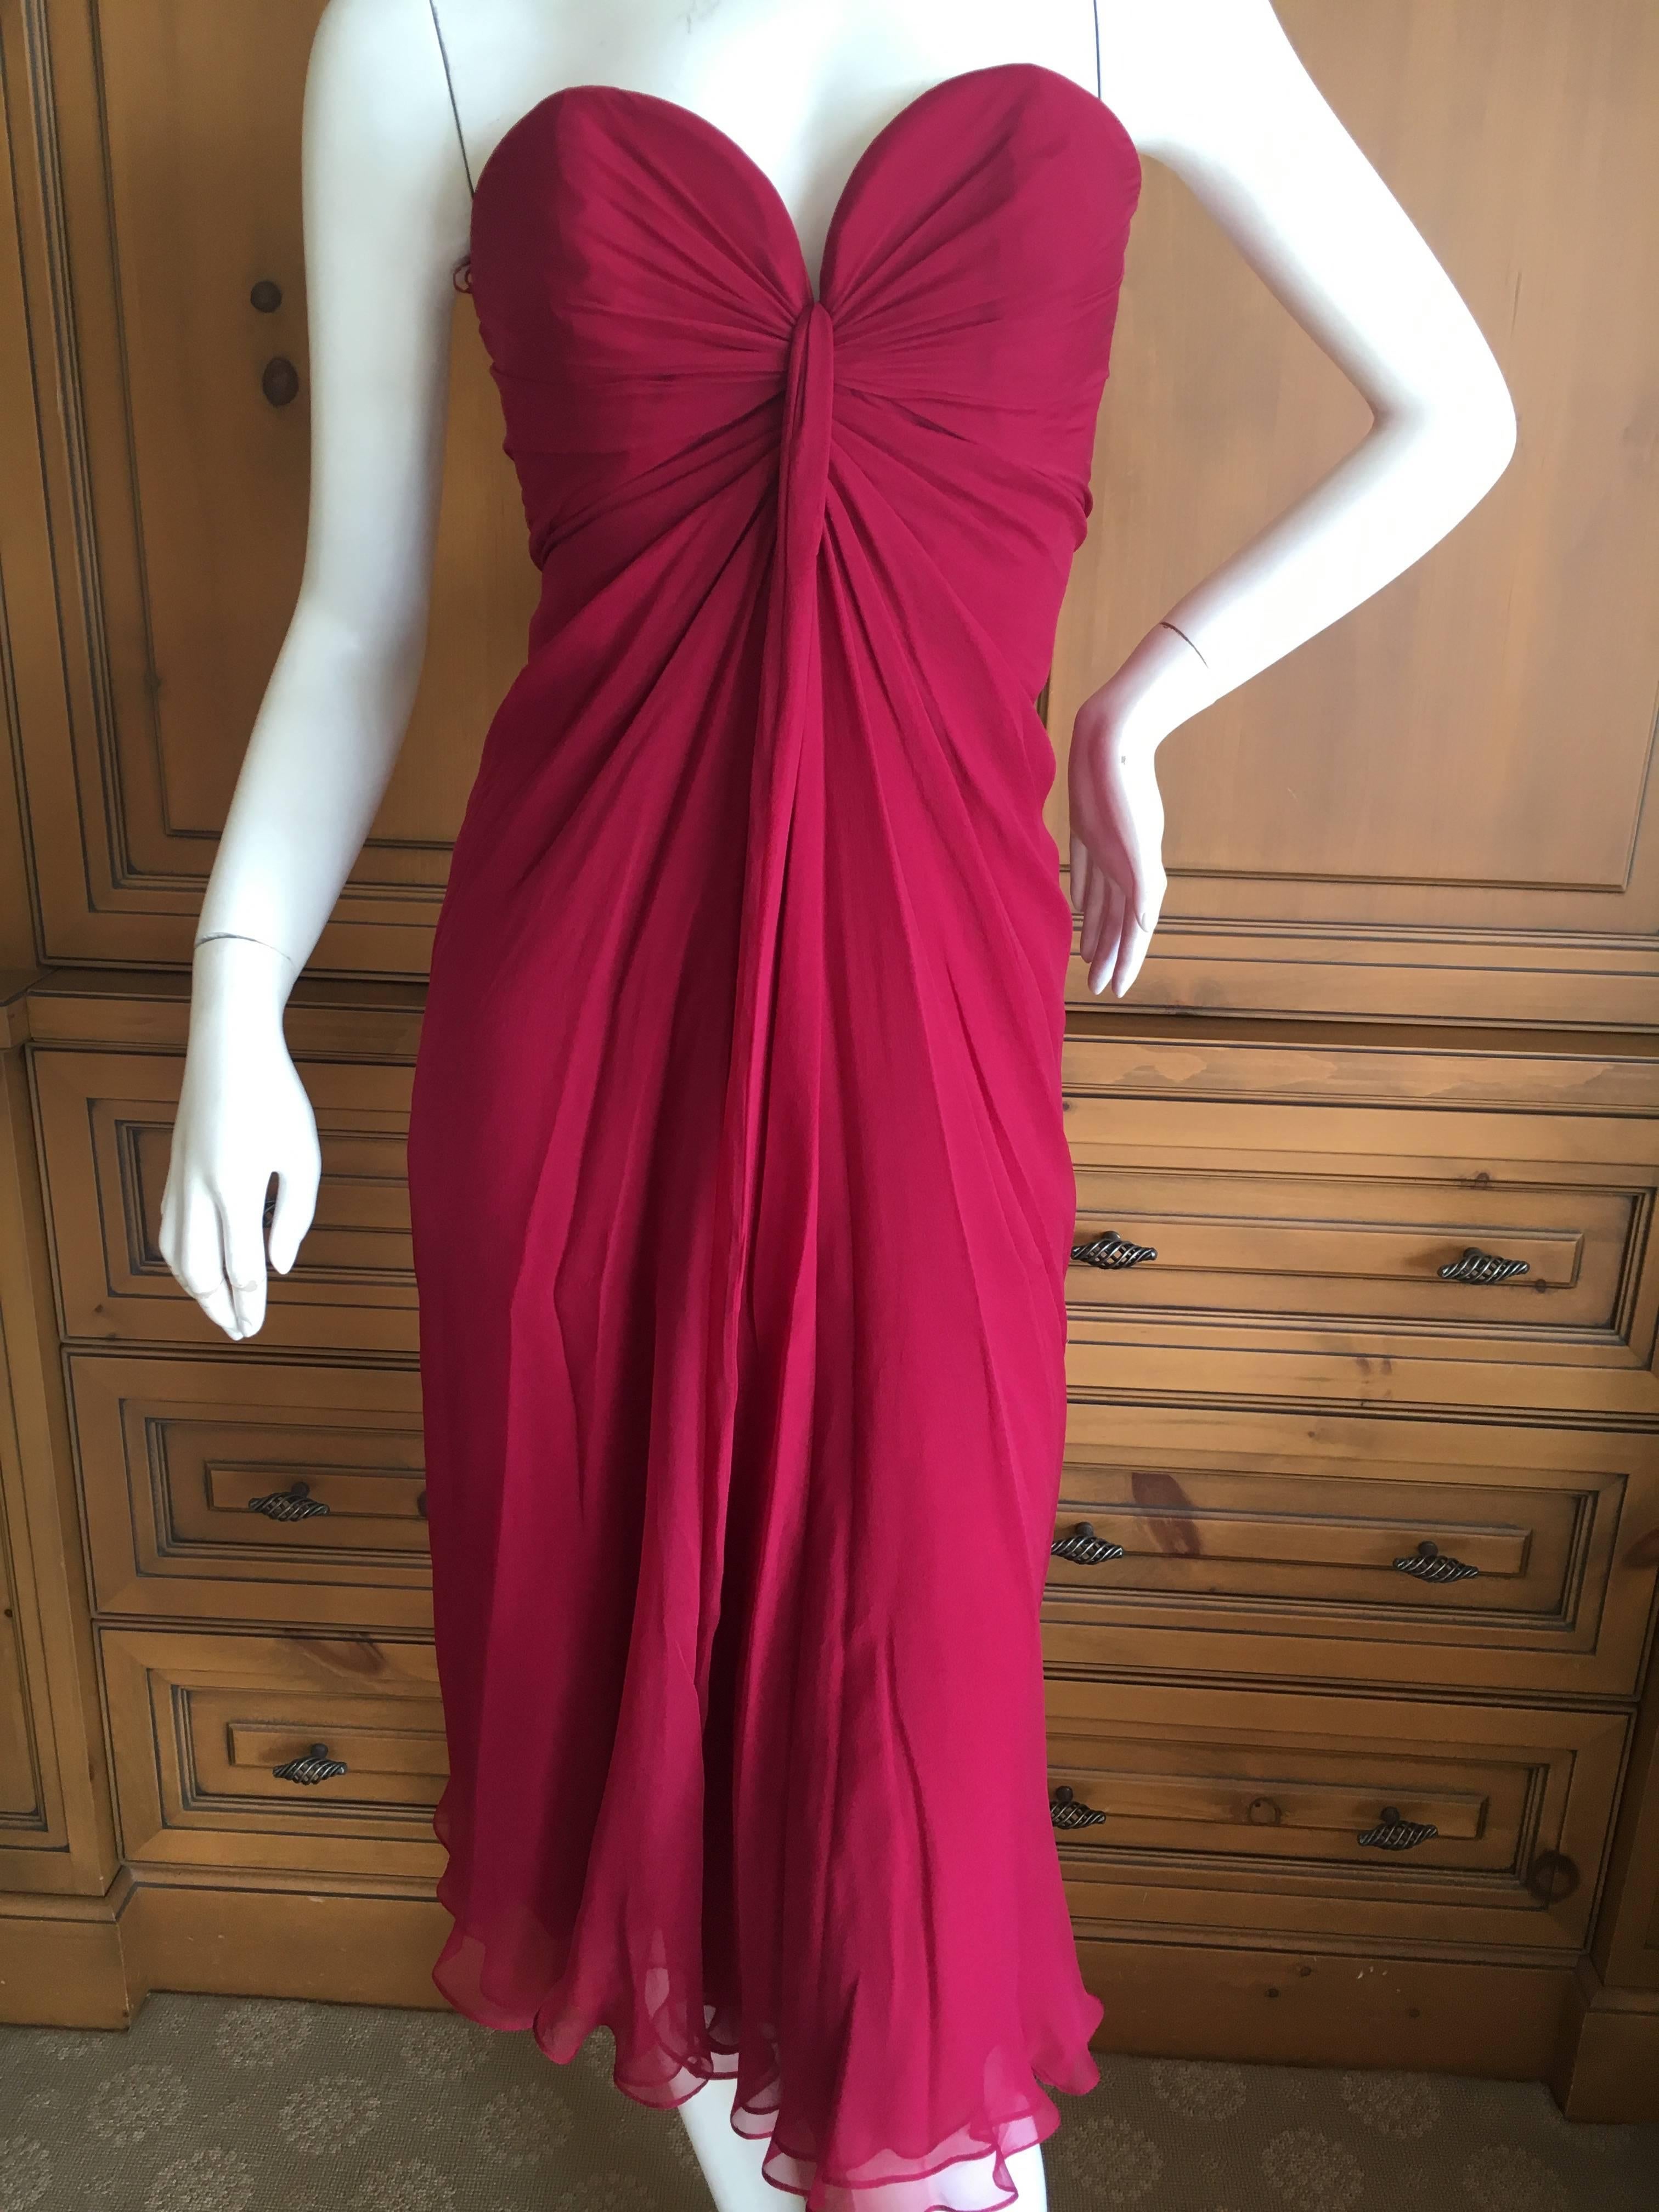 Yves Saint Laurent Red Silk Strapless Cocktail Dress In Excellent Condition For Sale In Cloverdale, CA